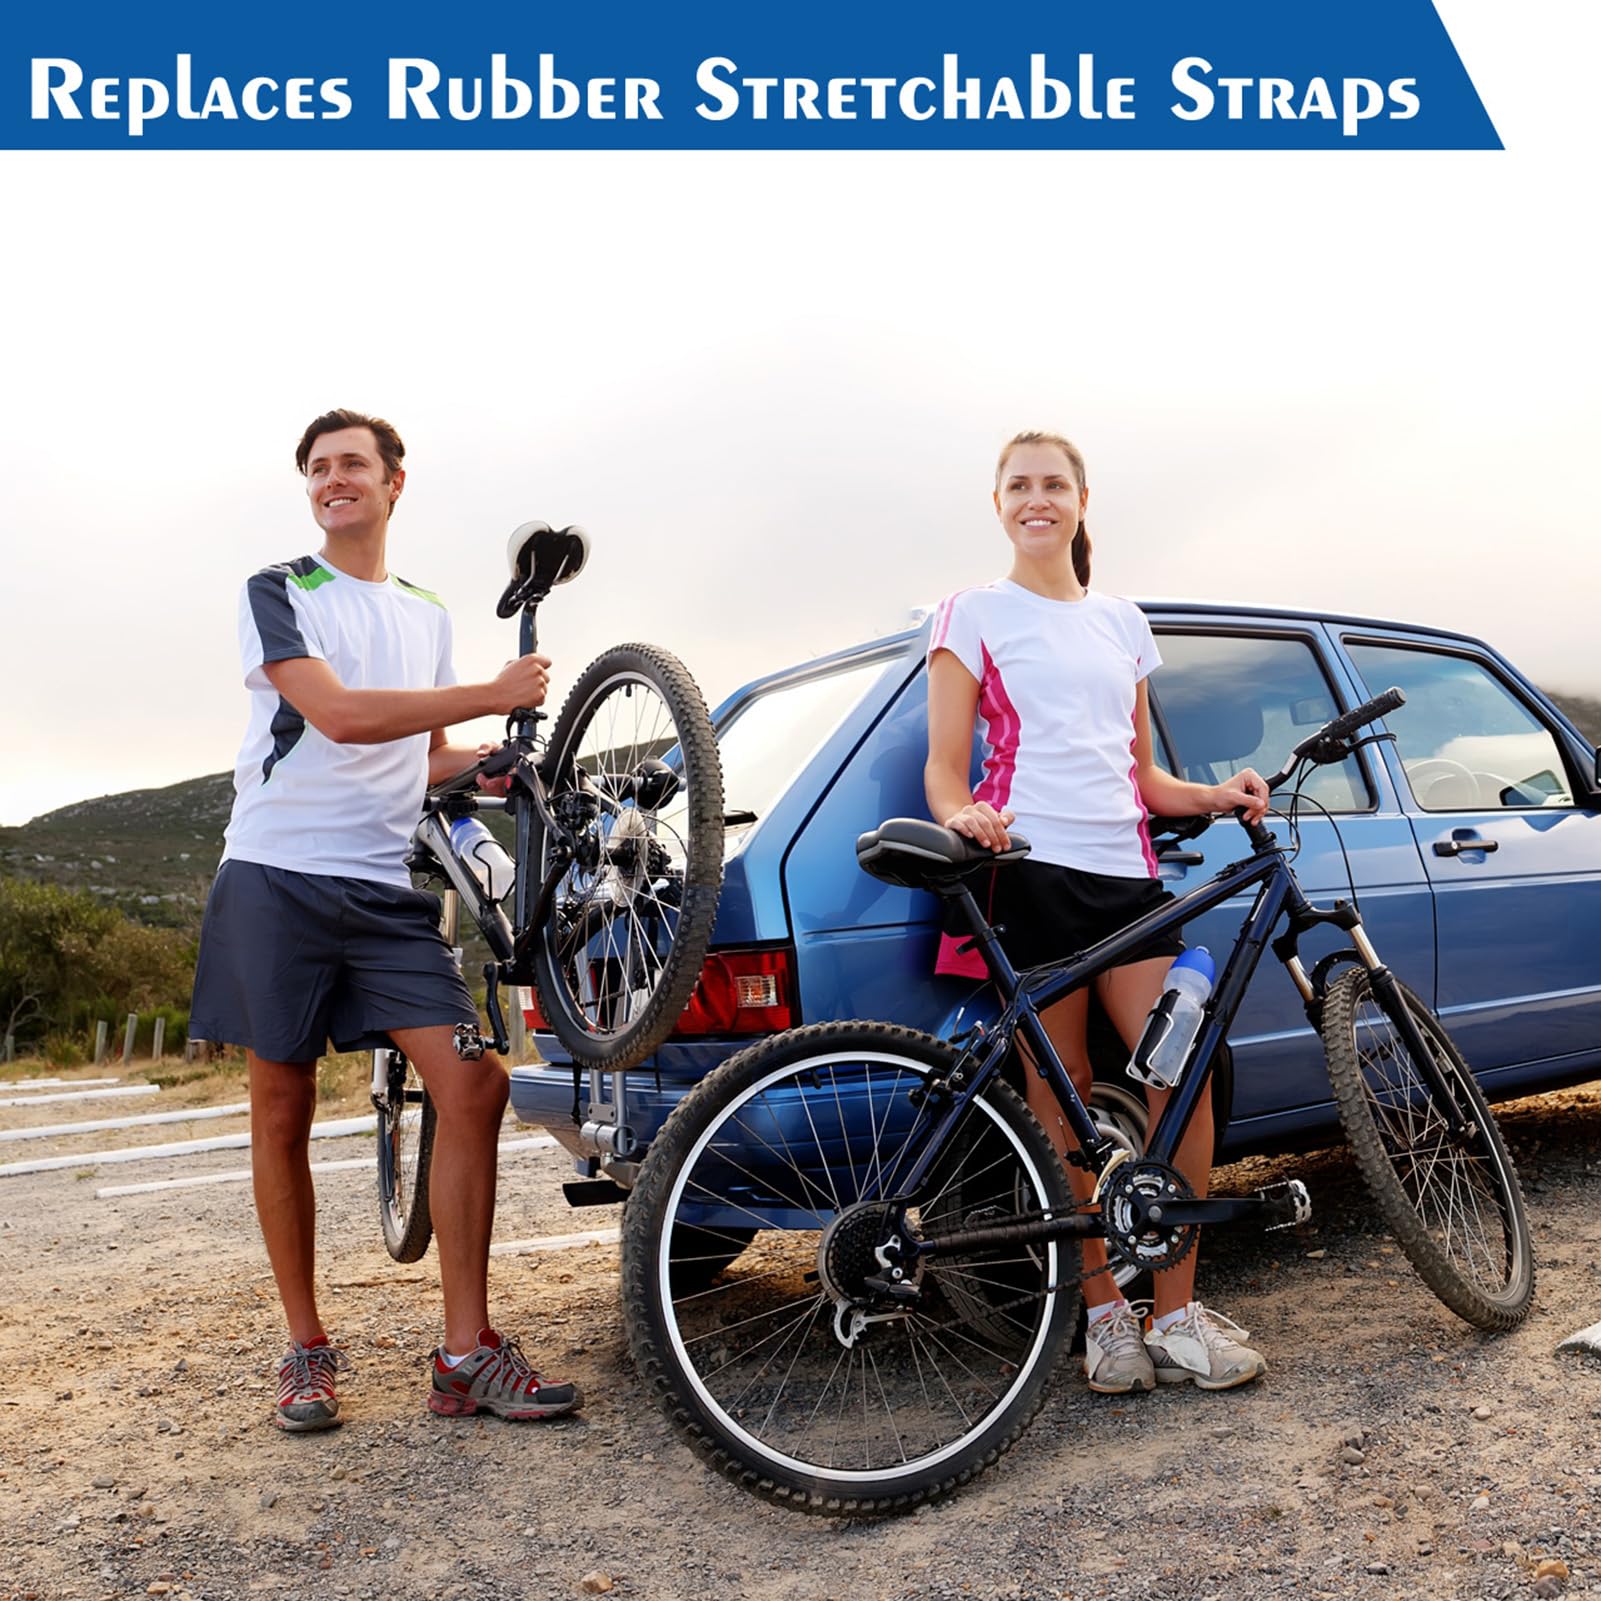 Bike Rack Strap, Bike Wheel Stabilizer Straps, Replacement Rubber Straps Accessory Strap Kit, Adjustable, Bicycle Wheel Stabilizer Straps 4 Pack Compatible with Thule 534